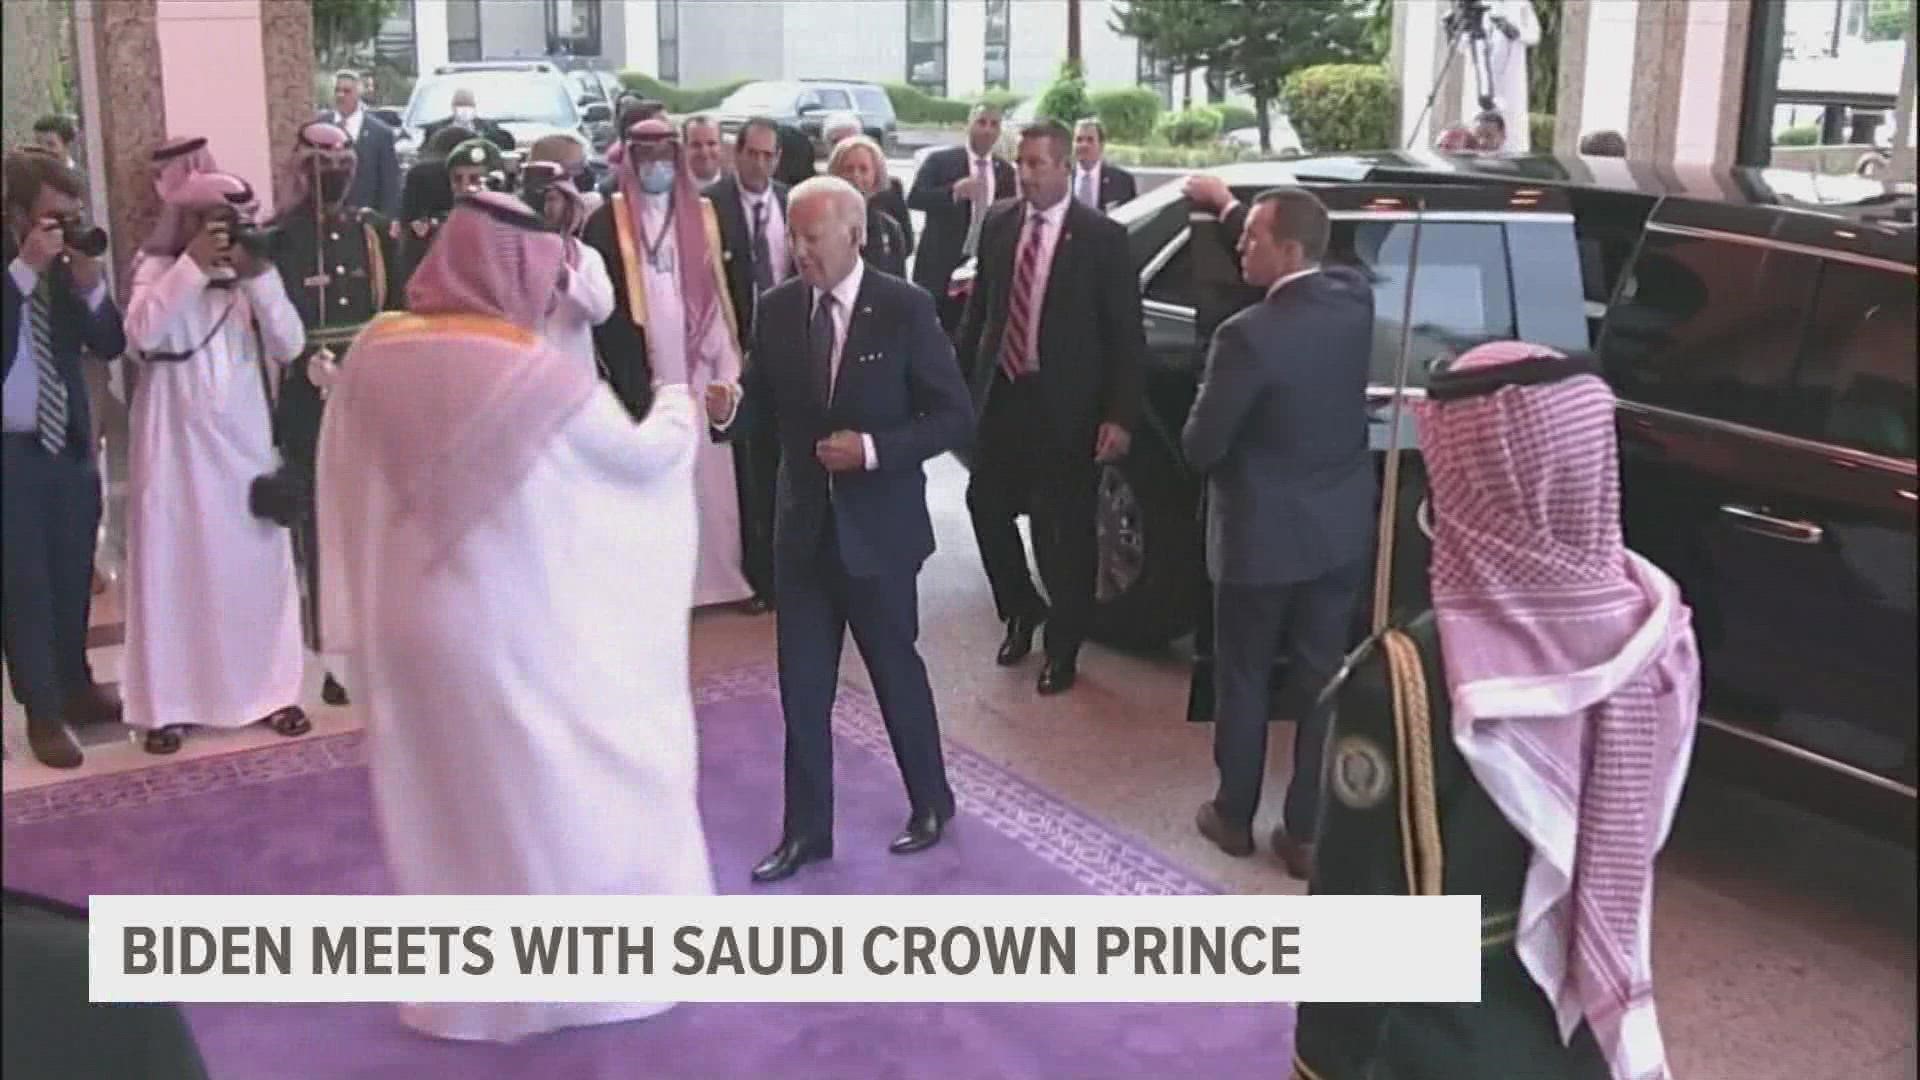 Until now, Biden had refused to speak to Saudi Crown Prince Mohammed bin Salman, the presumed heir to the throne currently held by his father, King Salman.